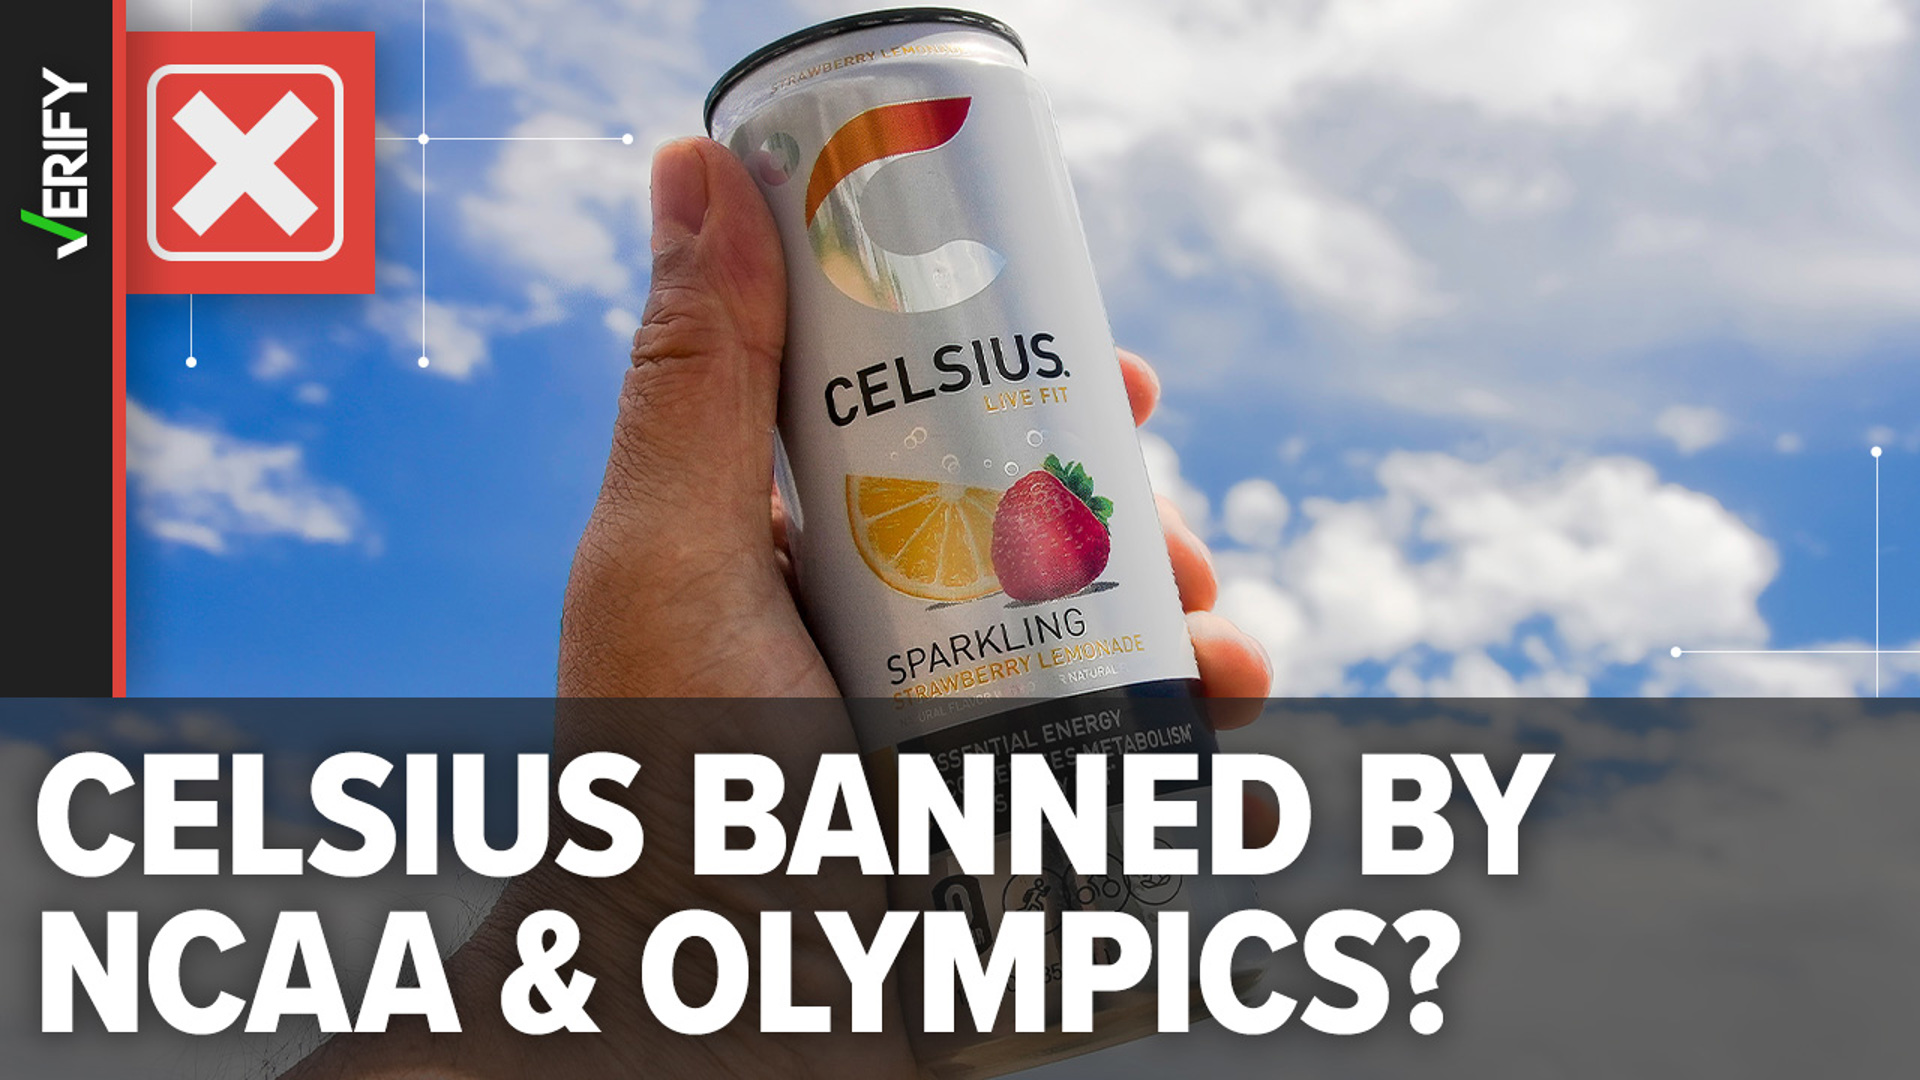 Some headlines and posts claim the NCAA and Olympics have banned athletes from consuming Celsius energy drinks because of their ingredients. Here’s why that’s false.